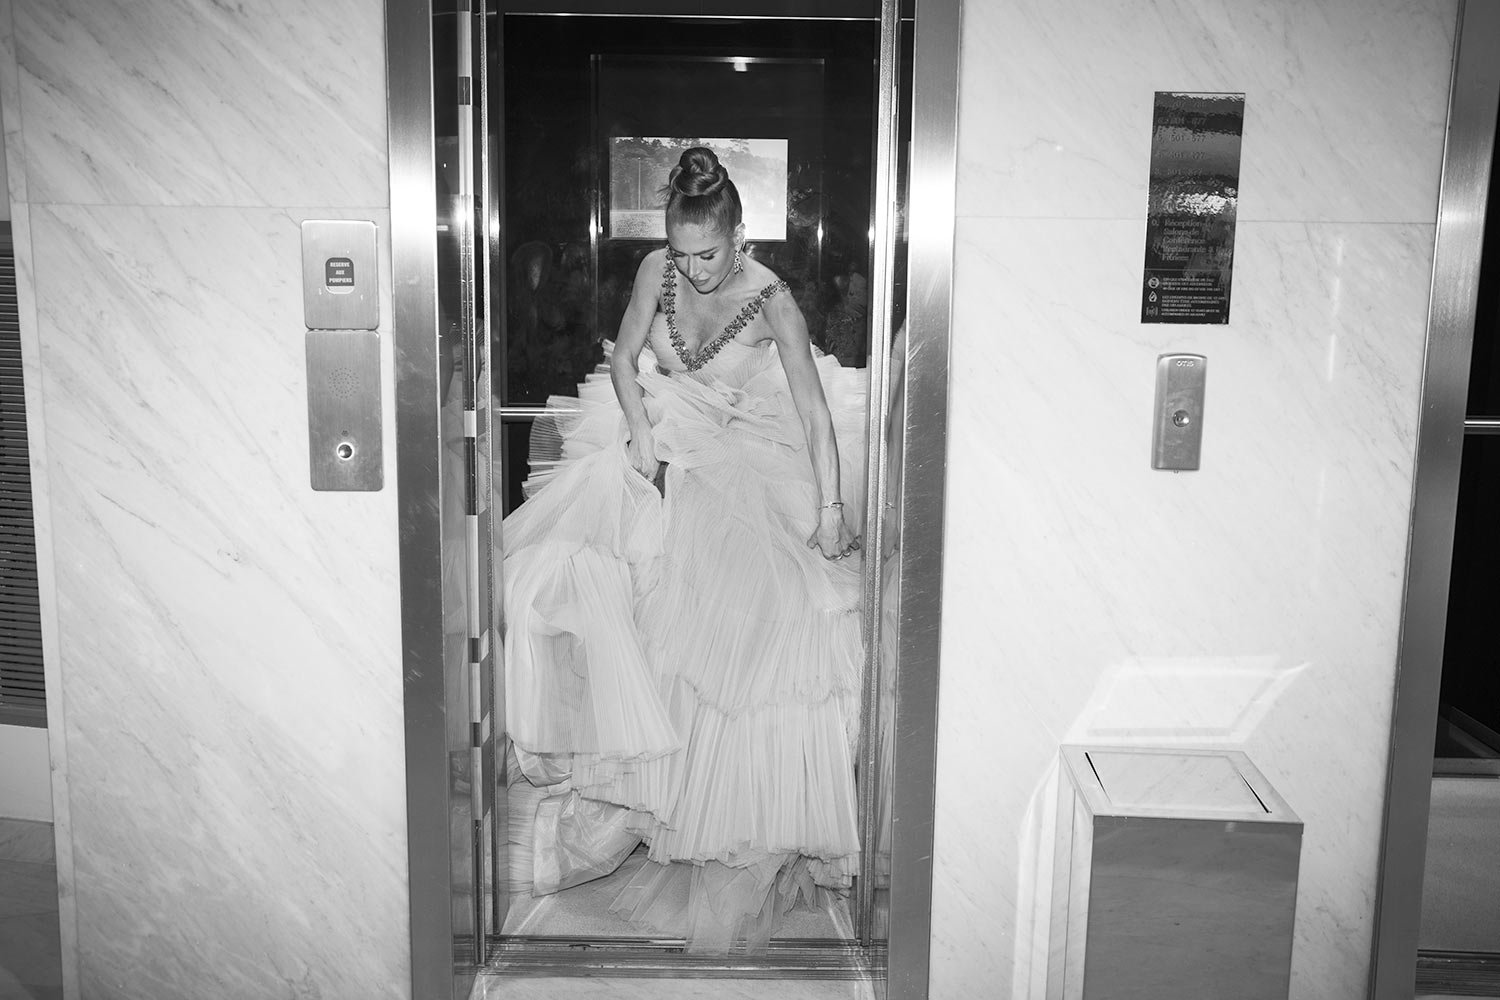  Maja Malnar enters the elevator at the Martinez hotel during the 75th international film festival, Cannes, southern France, Saturday, May 21, 2022. (AP Photo/Petros Giannakouris) 